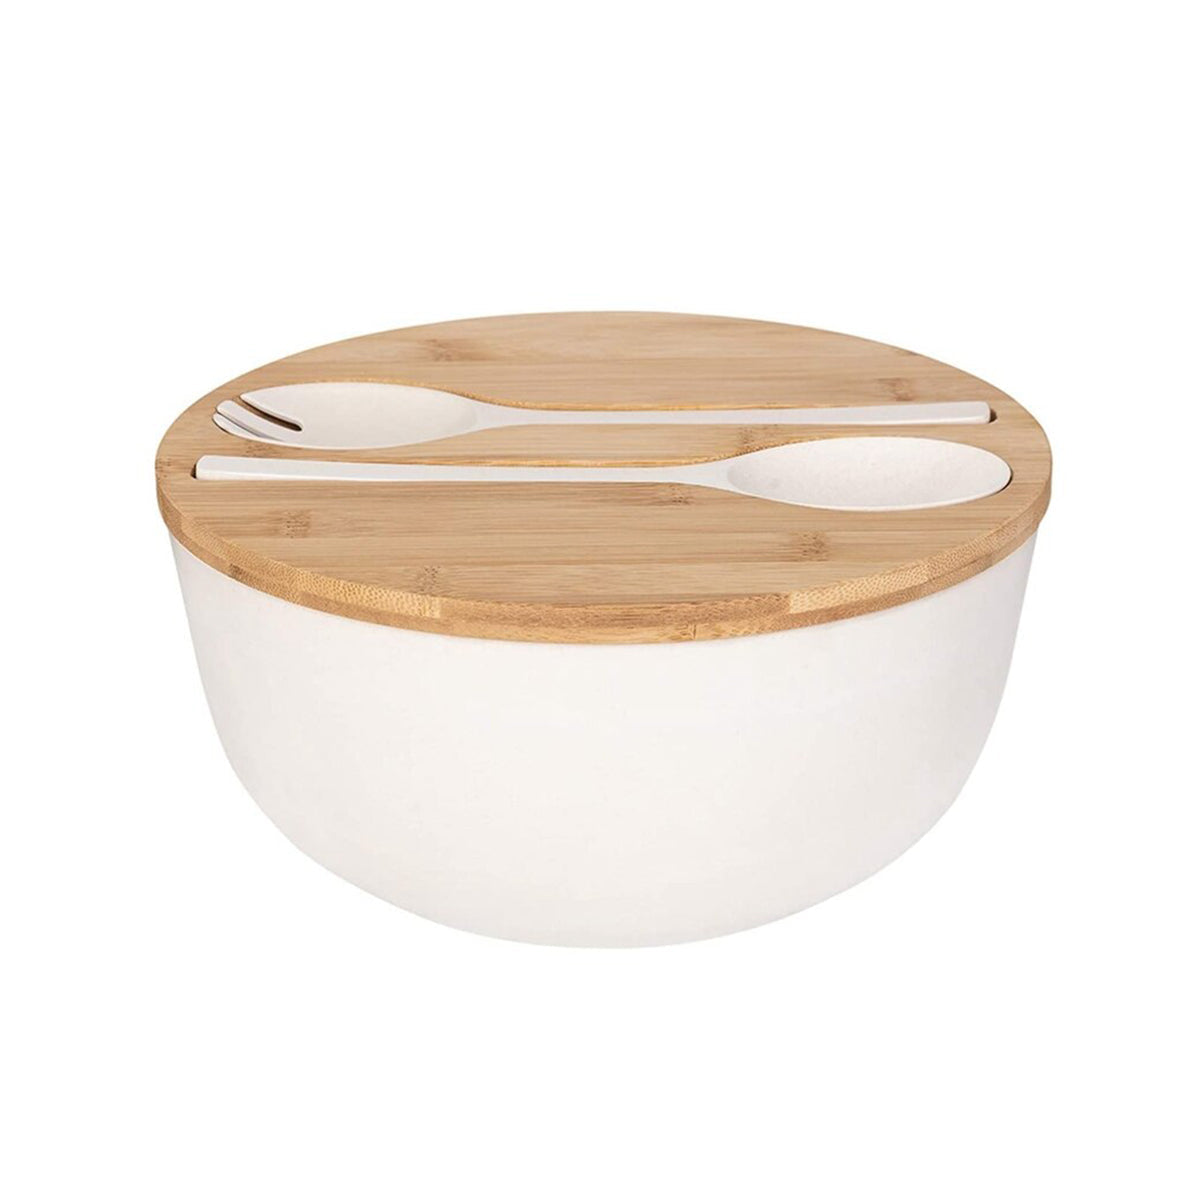 Bamboo Fiber Mixing Bowl With Spoons